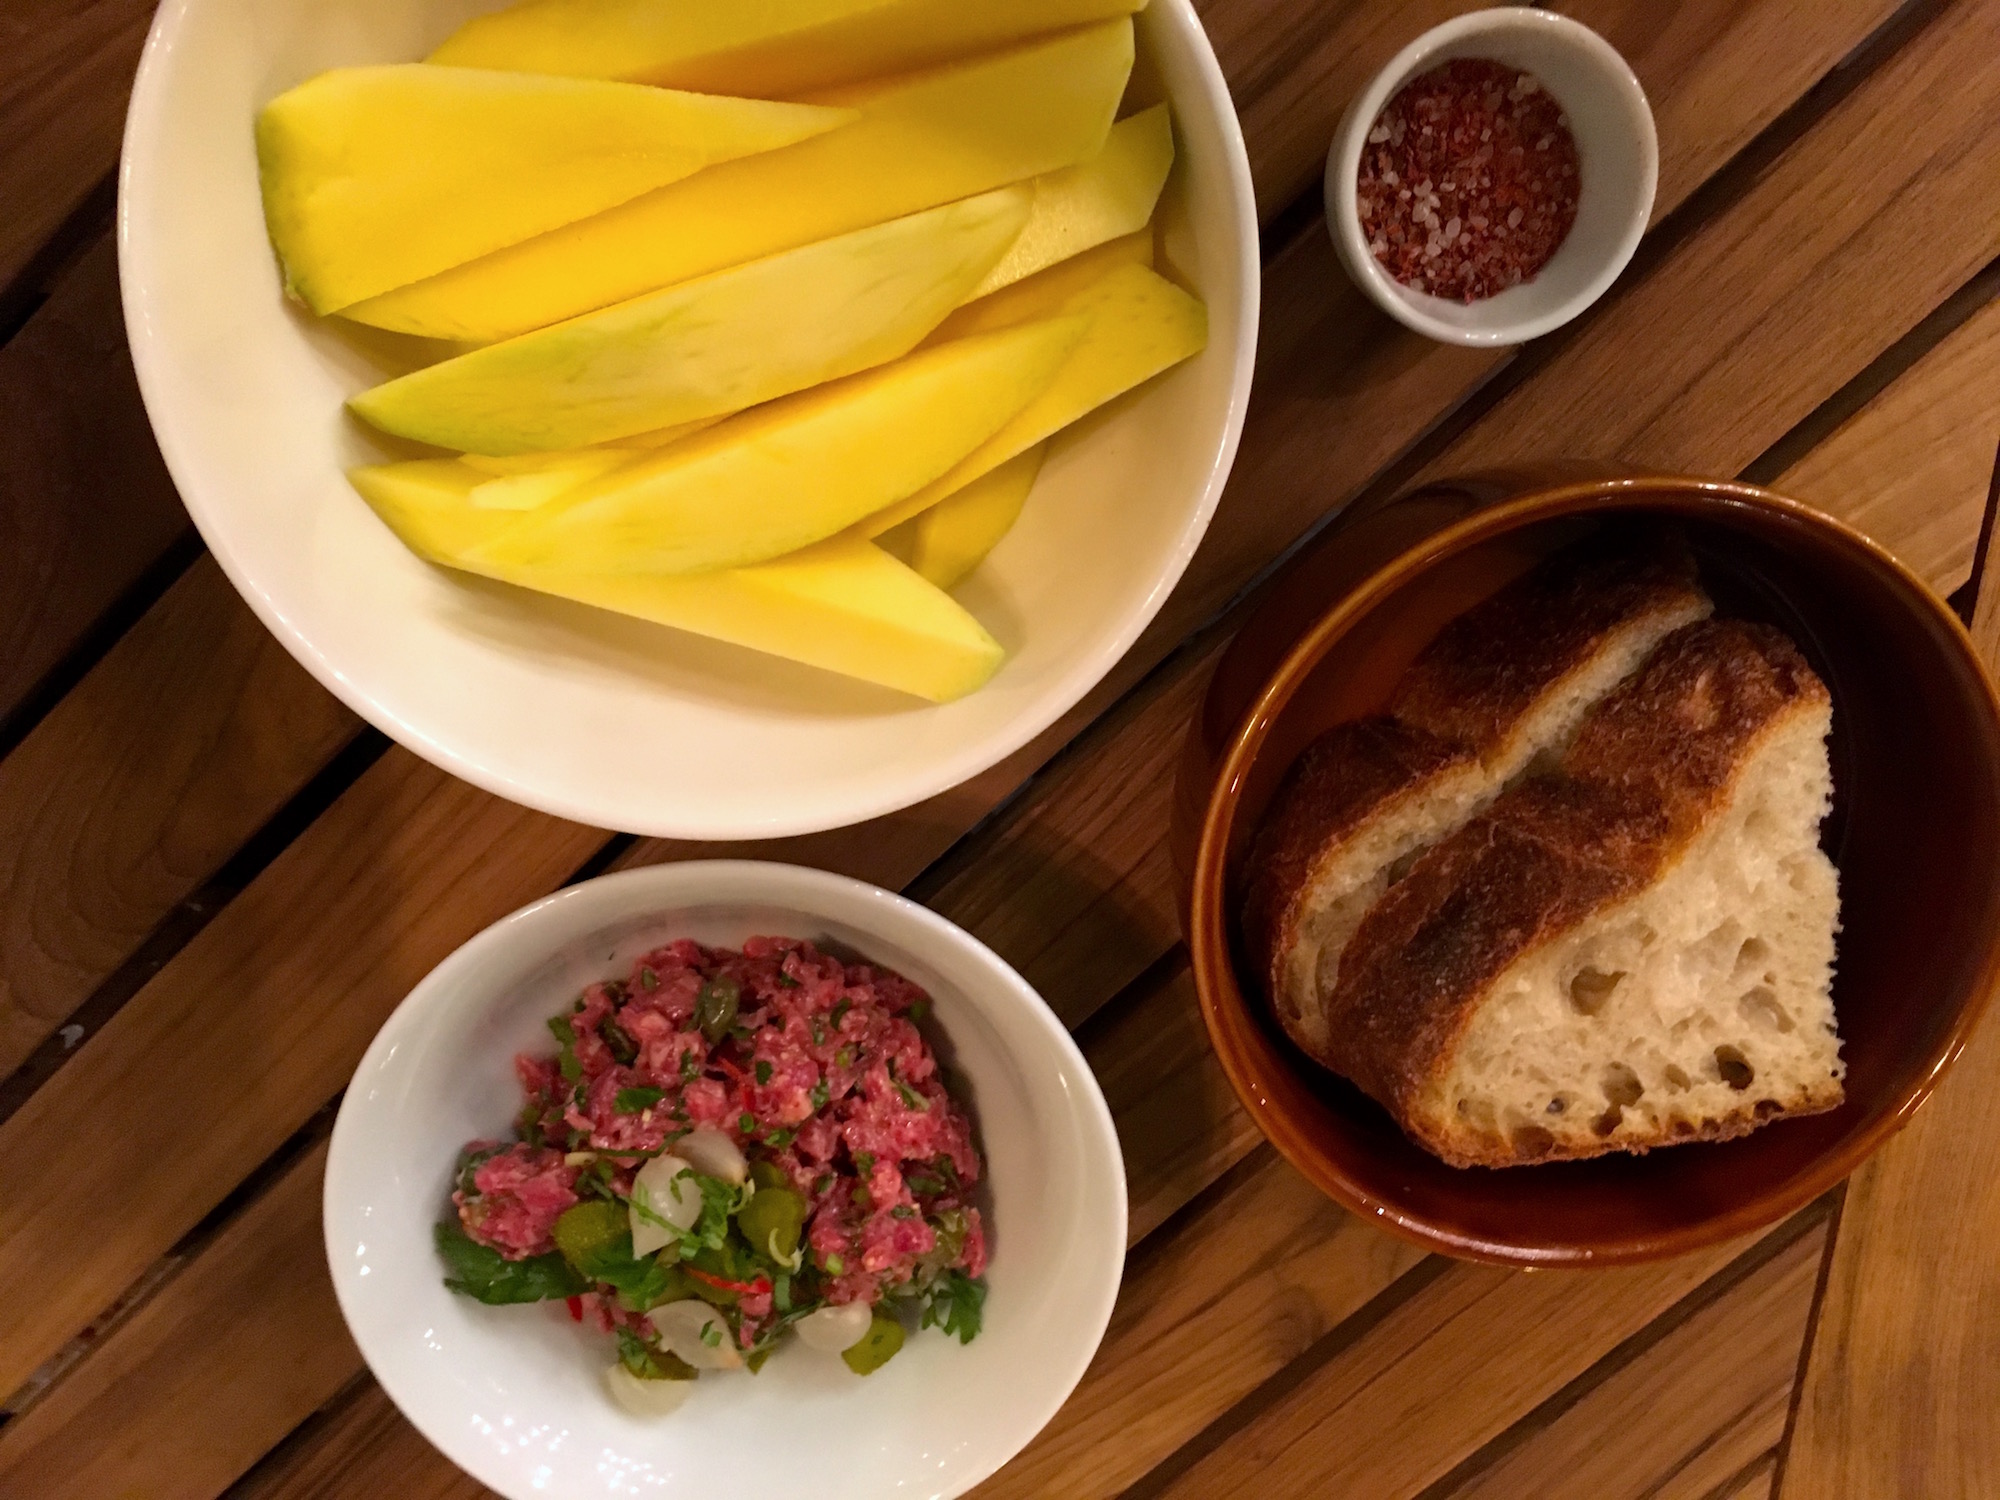 Mango with chili, Angus beef tartare with fresh bread at Beszálló